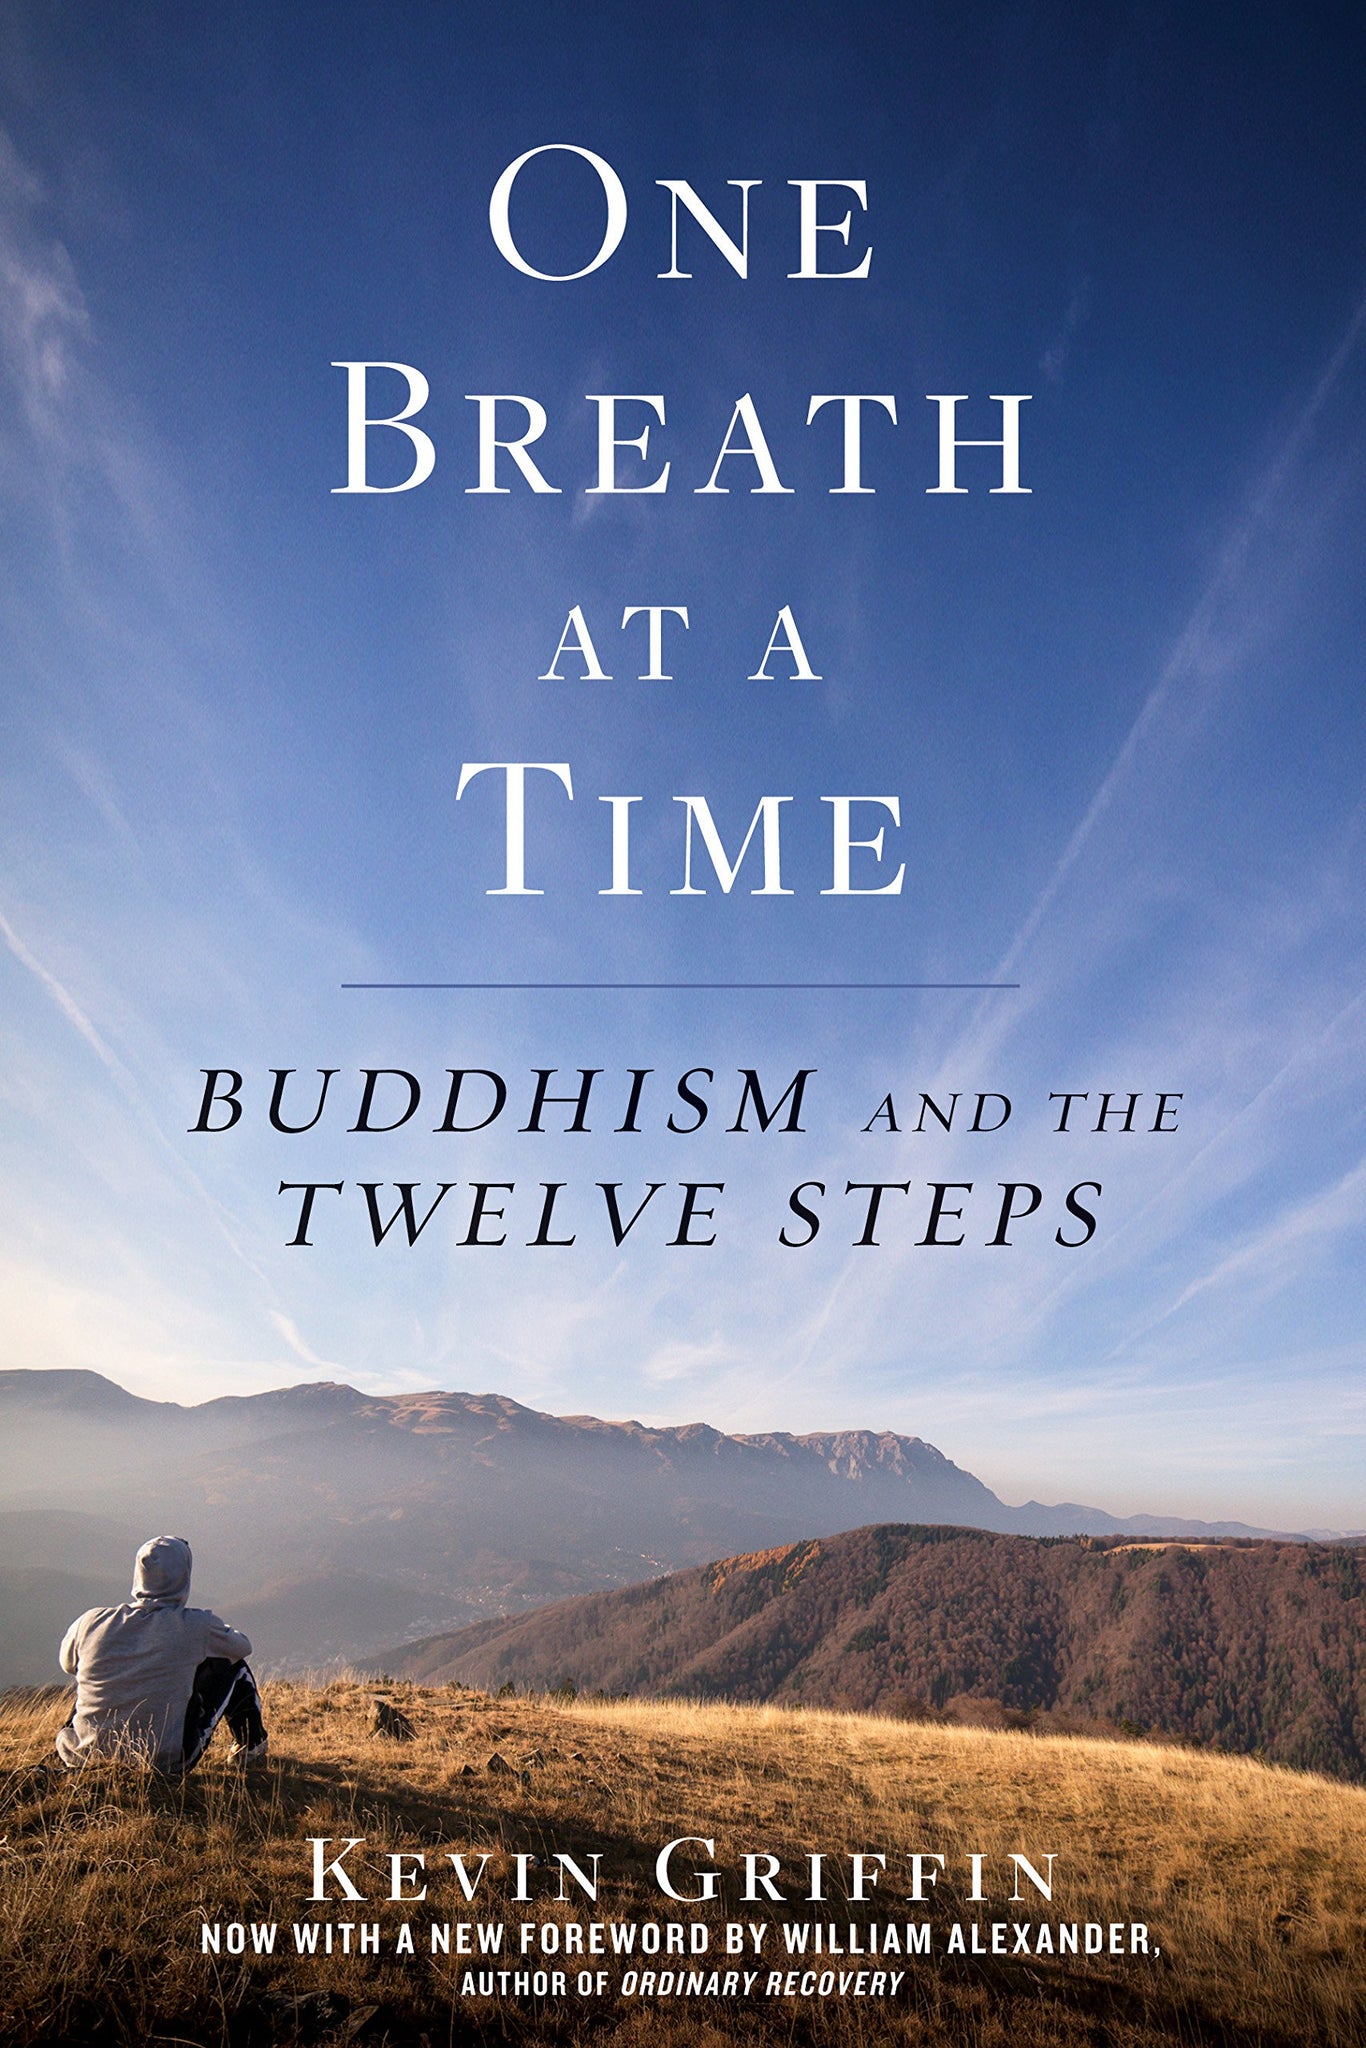 One Breath at a Time: Buddhism and the Twelve Steps by Kevin Griffin (Softcover)